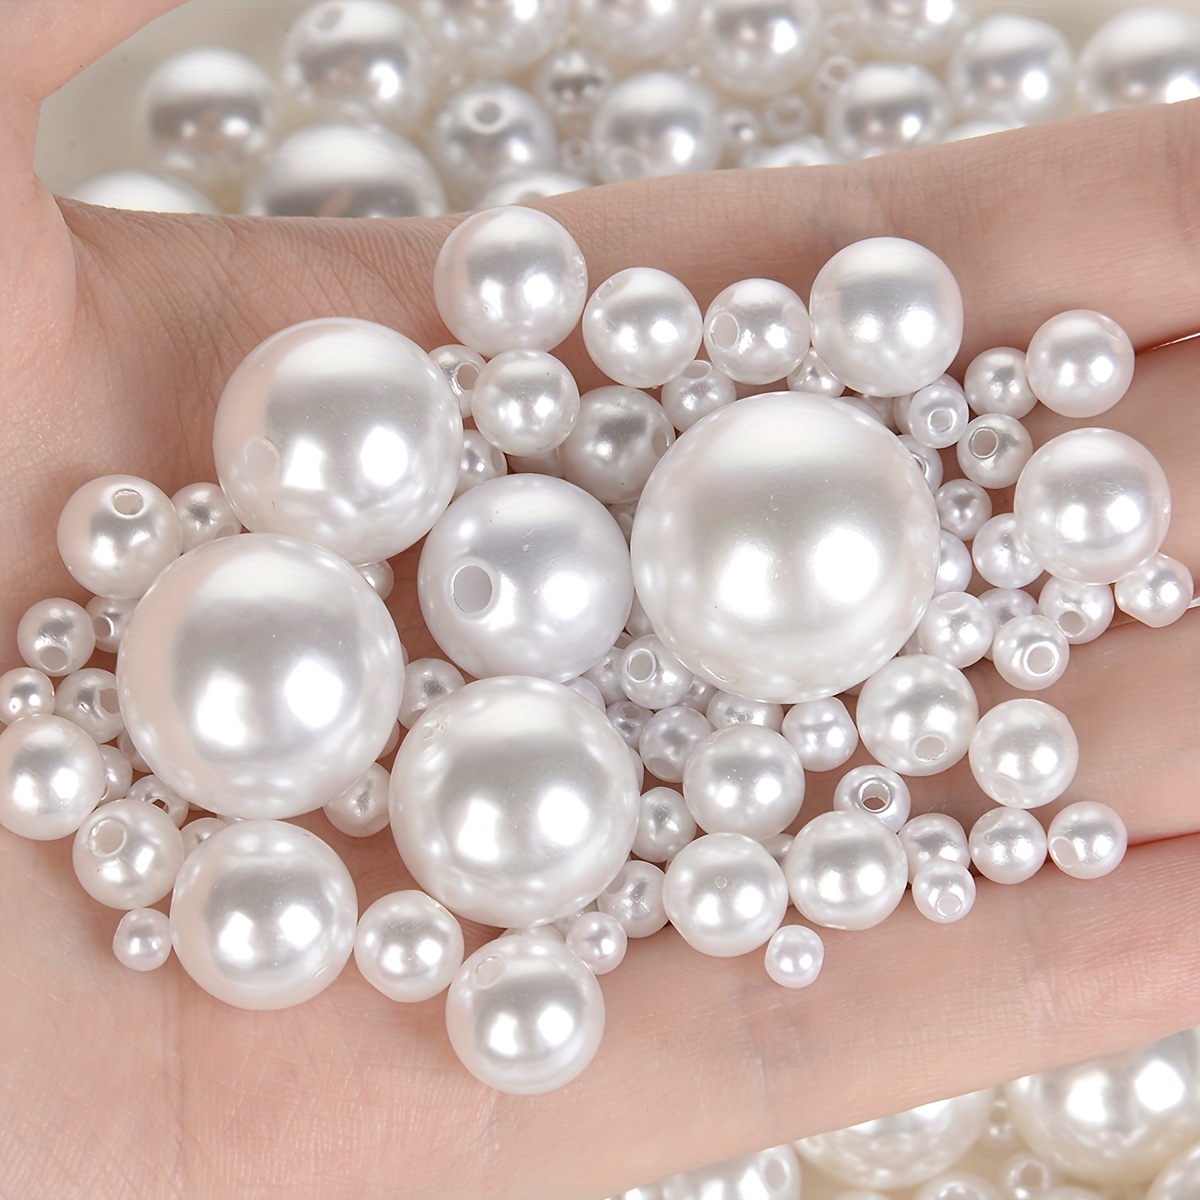 380pcs Art Faux Pearls Undrilled Faux Pearls No Hole Imitation Round Pearls  Beads Loose Pearls Decorative Bulk Filler Beads for Jewelry Making, Crafts